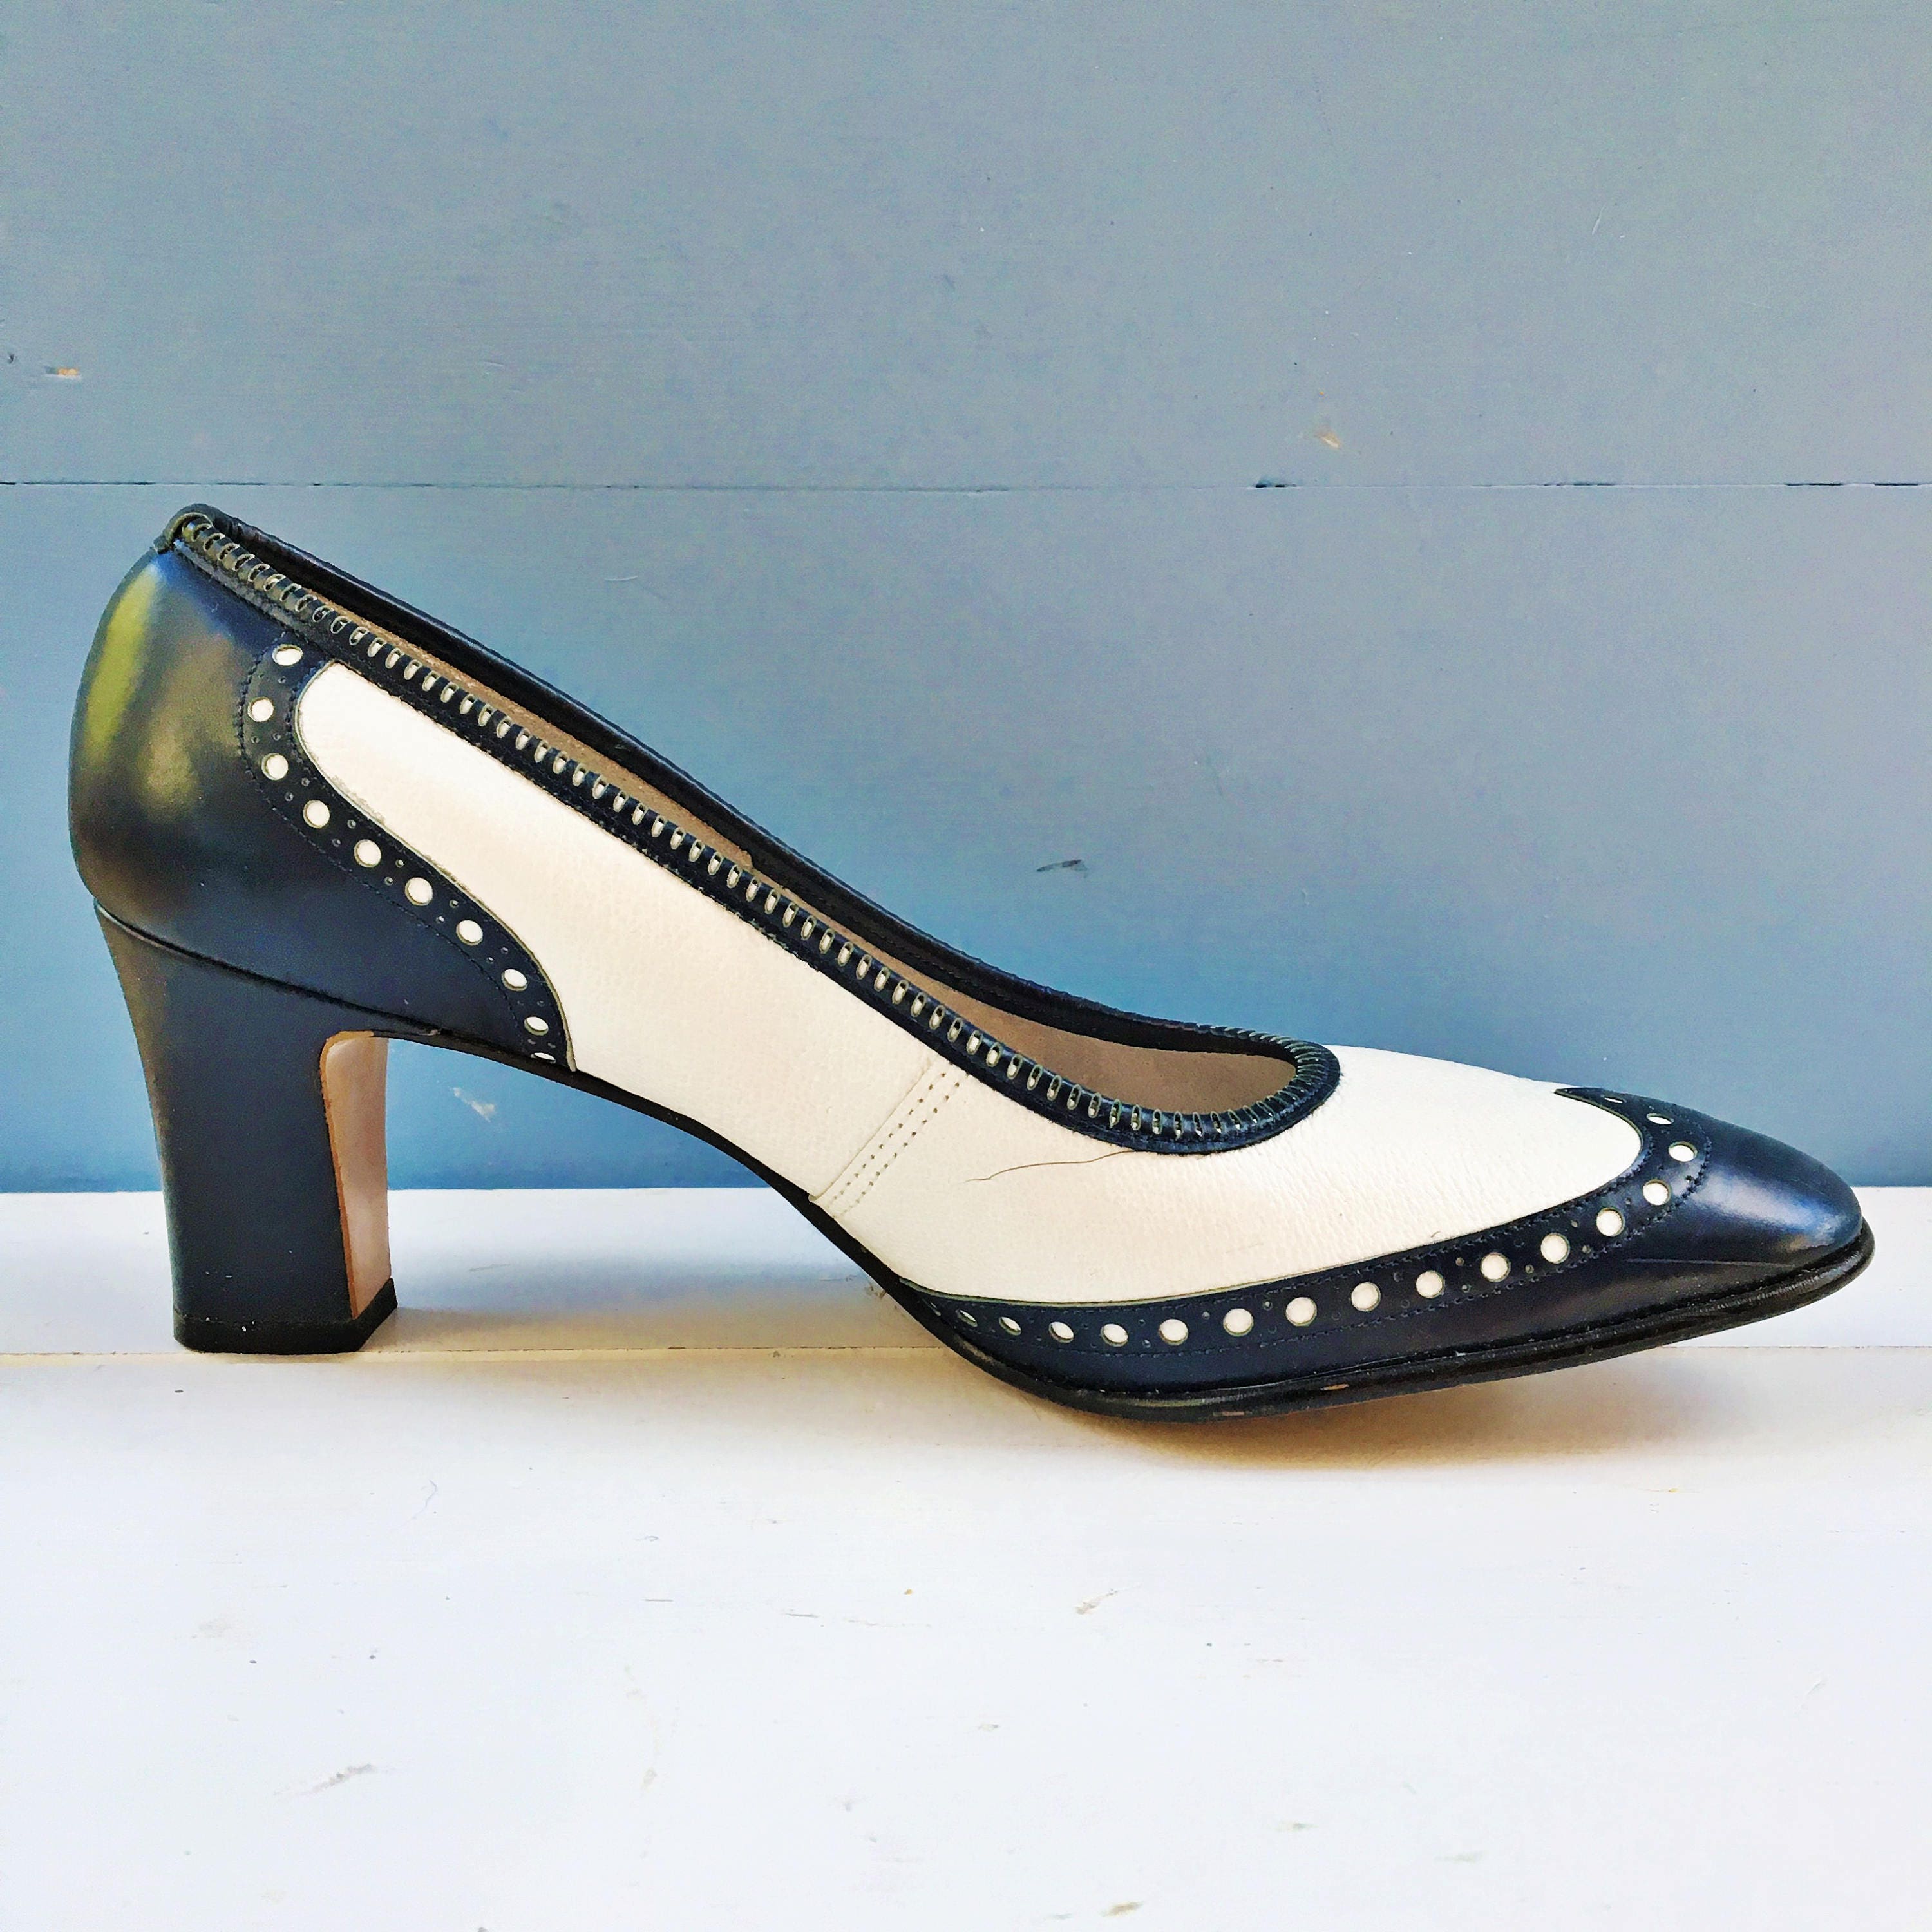 Vintage Navy and White Spectator Heels, Women's Size 8